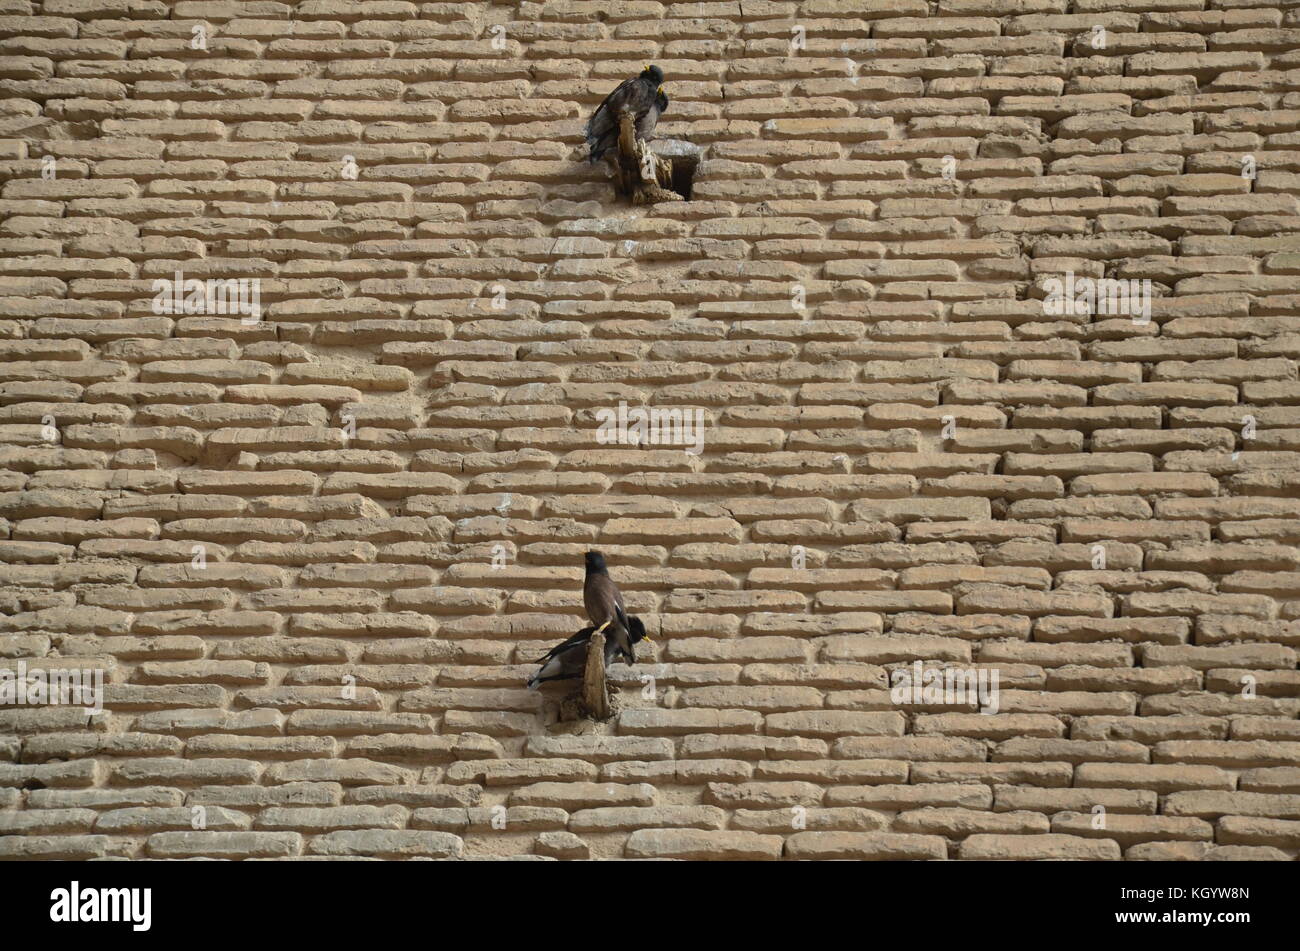 two birds on wall. Turkestan is an ancient city in Kazakhstan with archeologic record dating back to the 4th century. Khwaja Ahmad Yasavi mausoleum Stock Photo